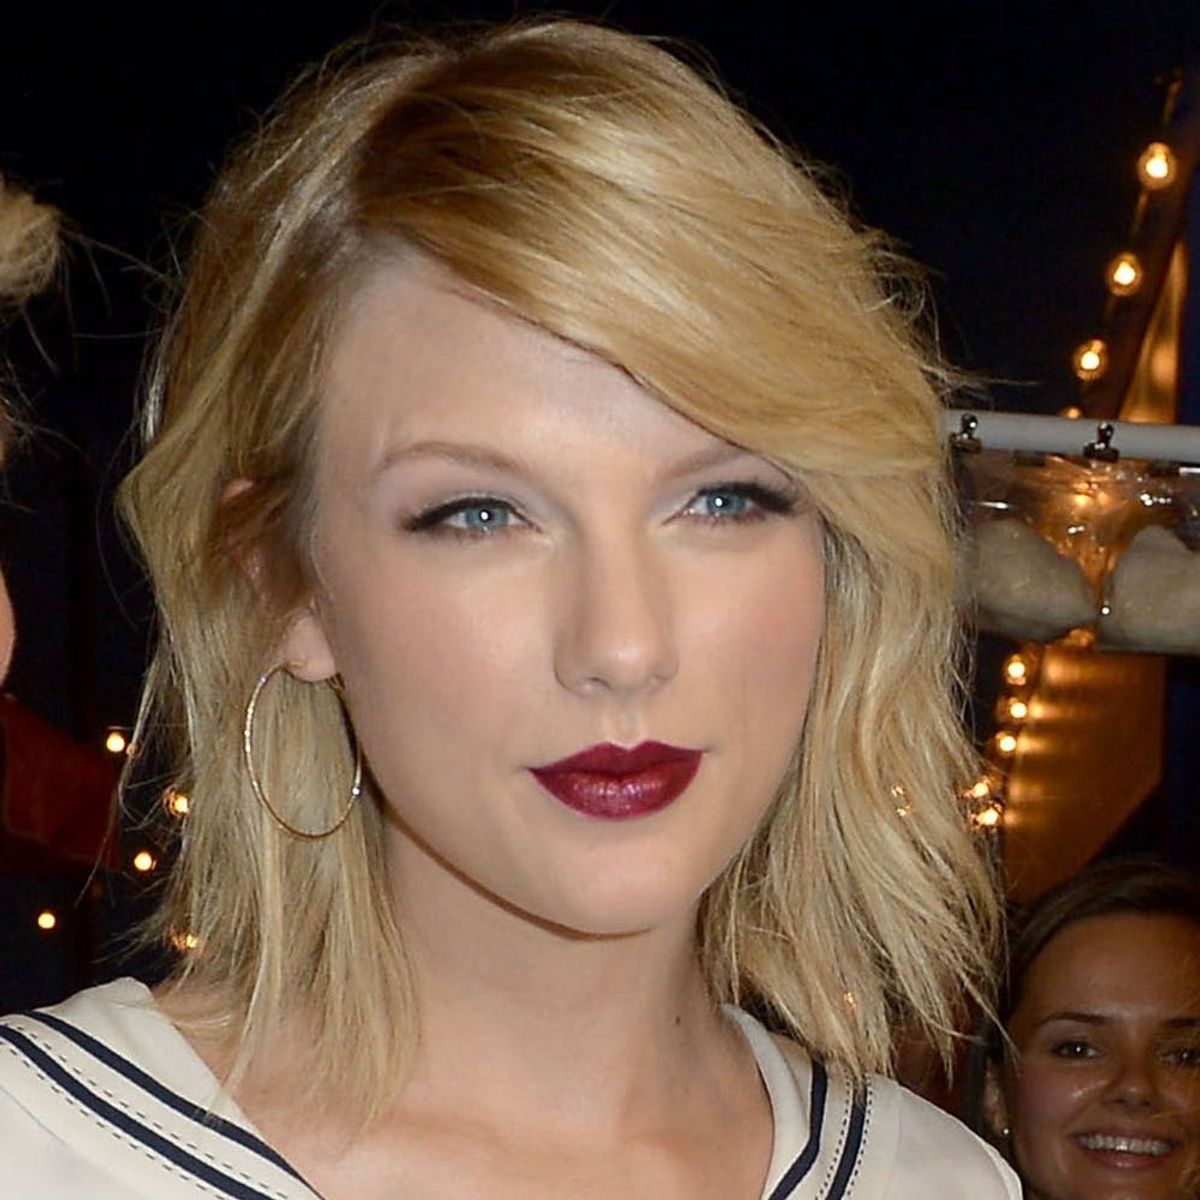 Fans Think the Baby in Taylor Swift’s New Track Is the Child of *This* Squad Member